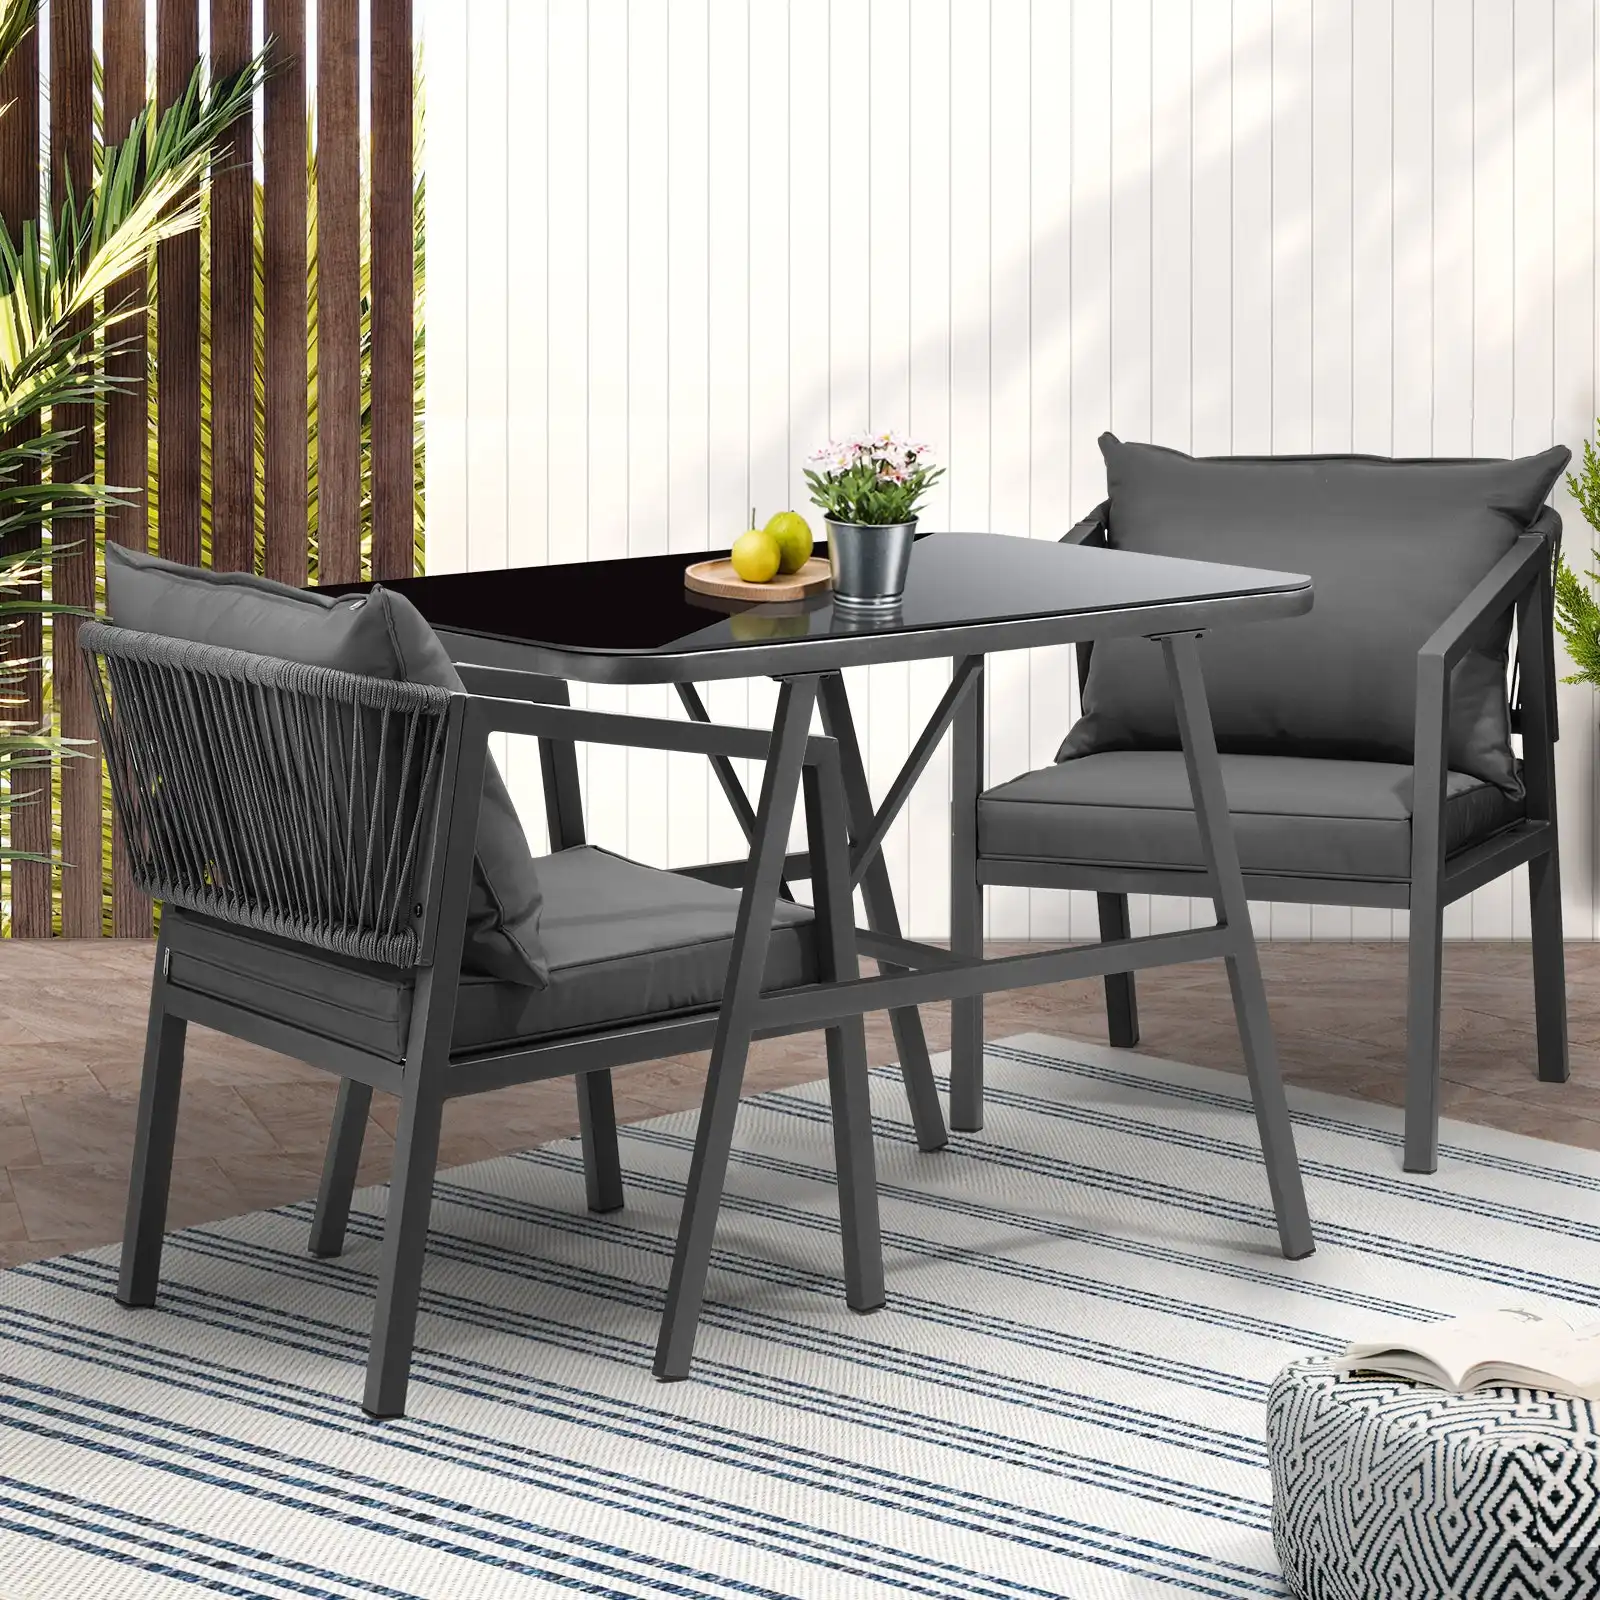 Livsip 3PCS Outdoor Dining Setting Lounge Patio Furniture Table Chairs Set